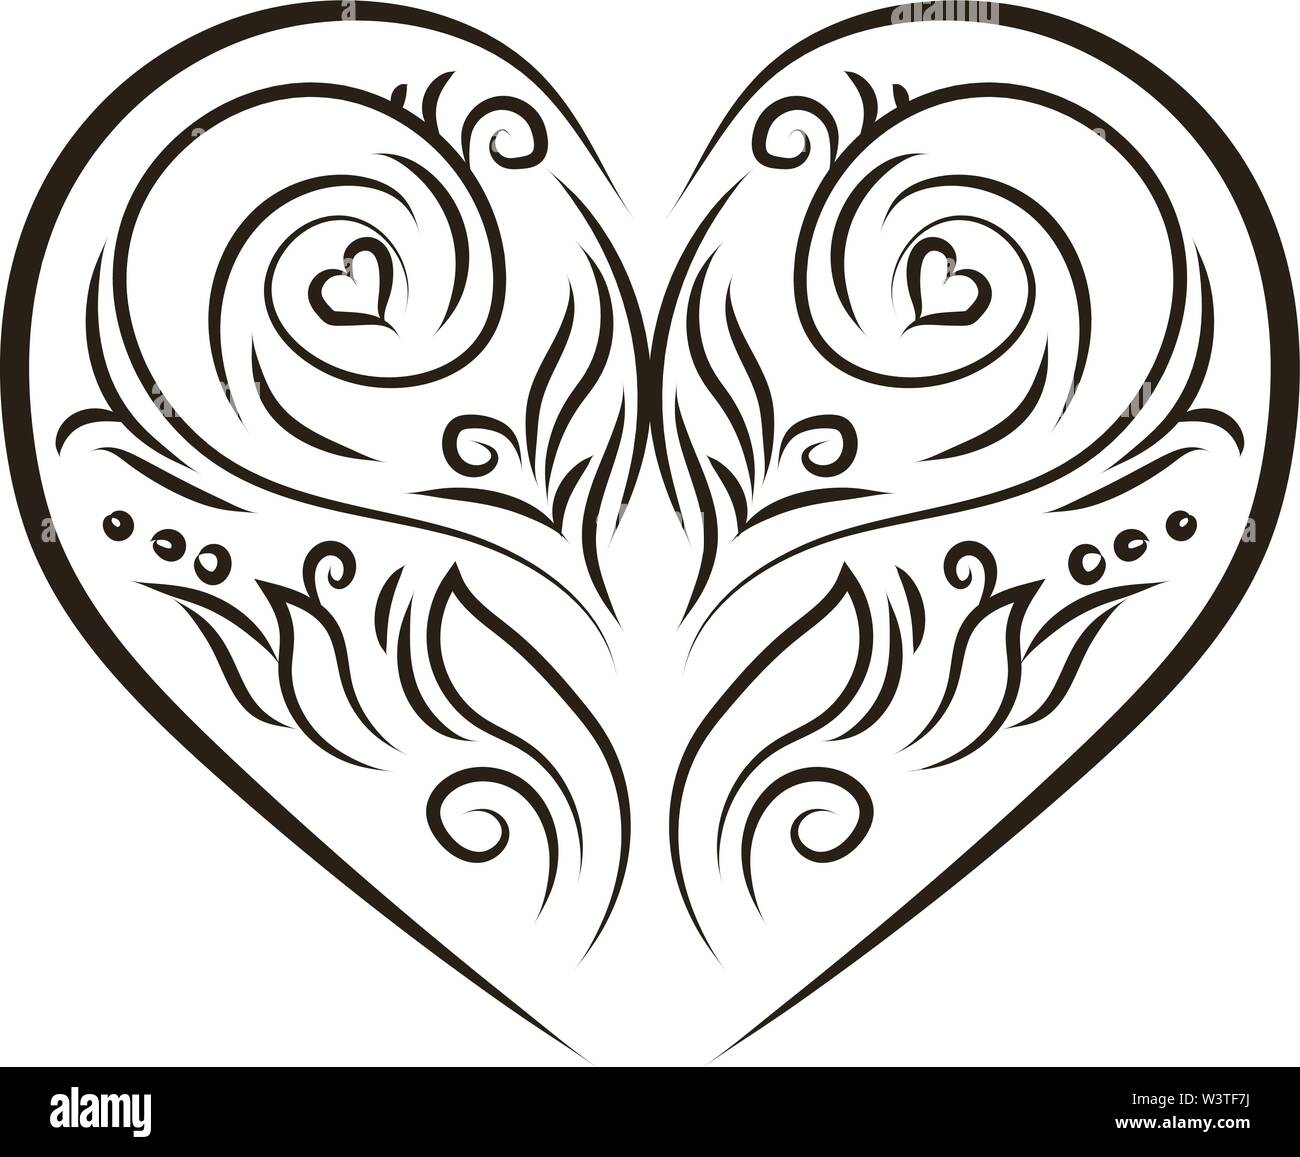 Heart Tattoo Design drawing free image download